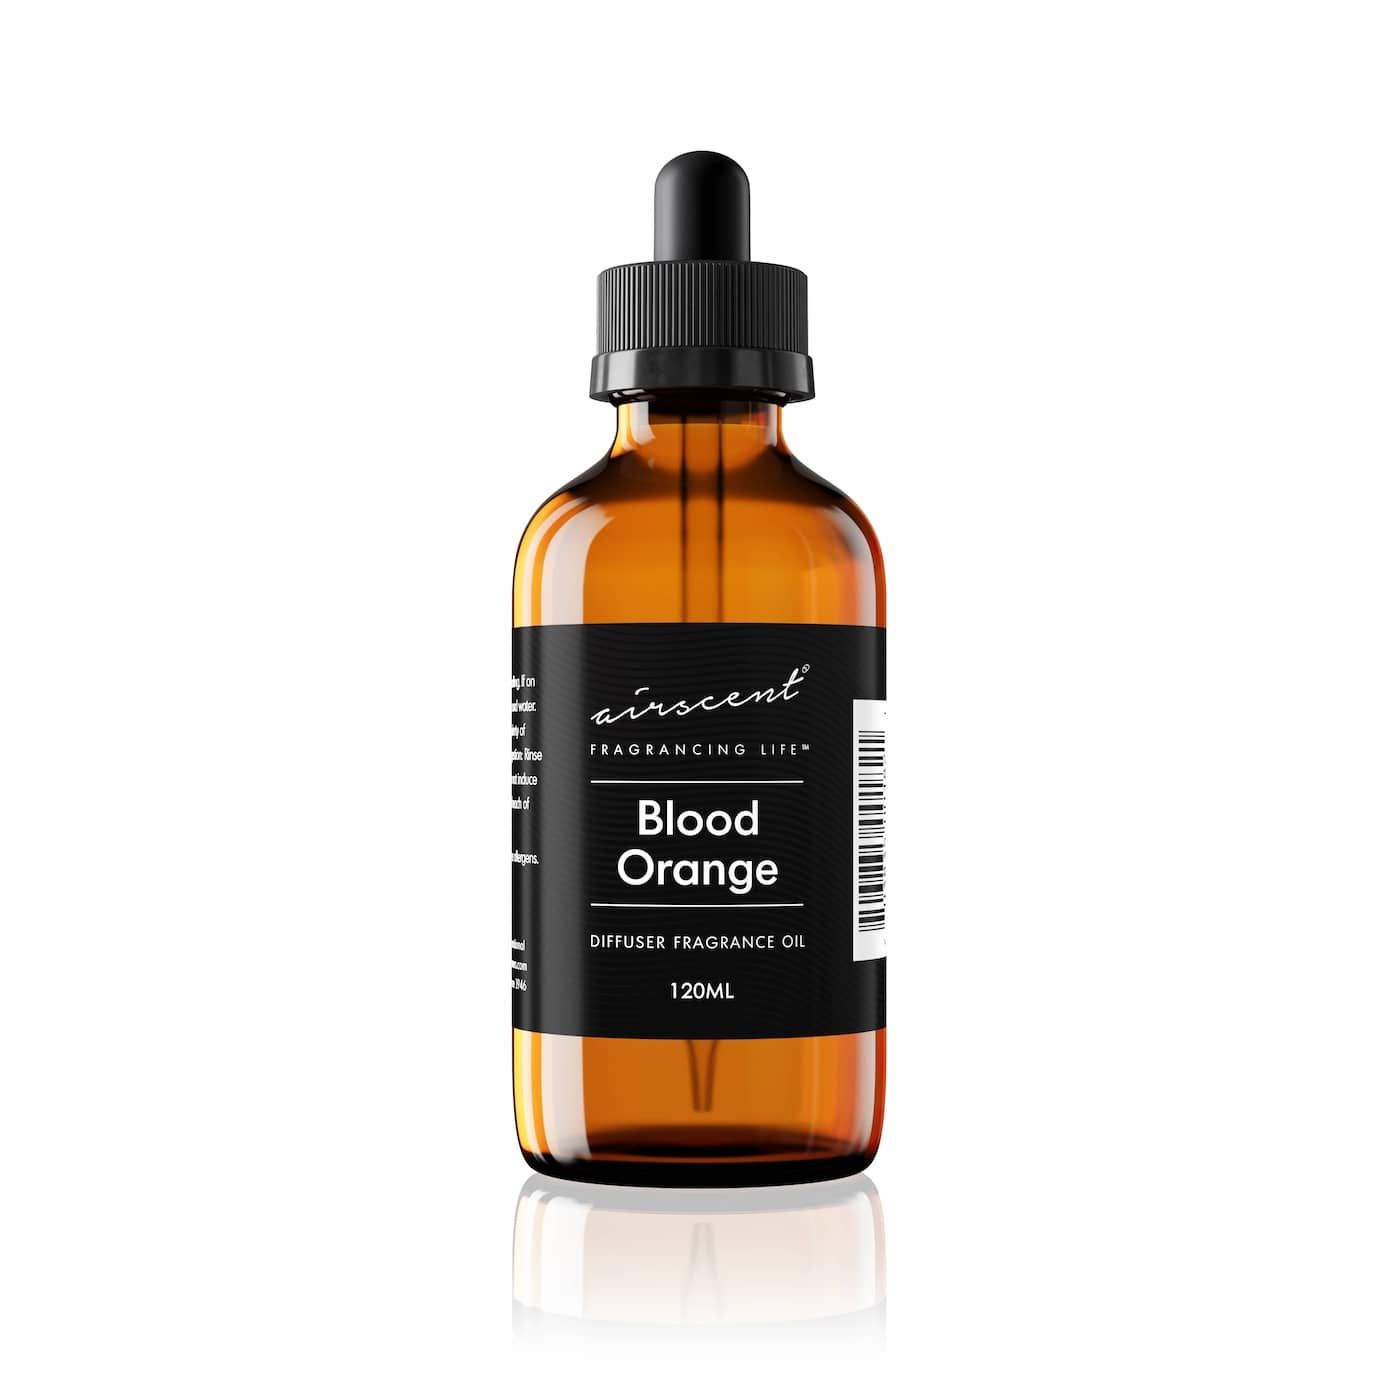 Blood Orange Diffuser Oil for Aromatherapy Diffusers